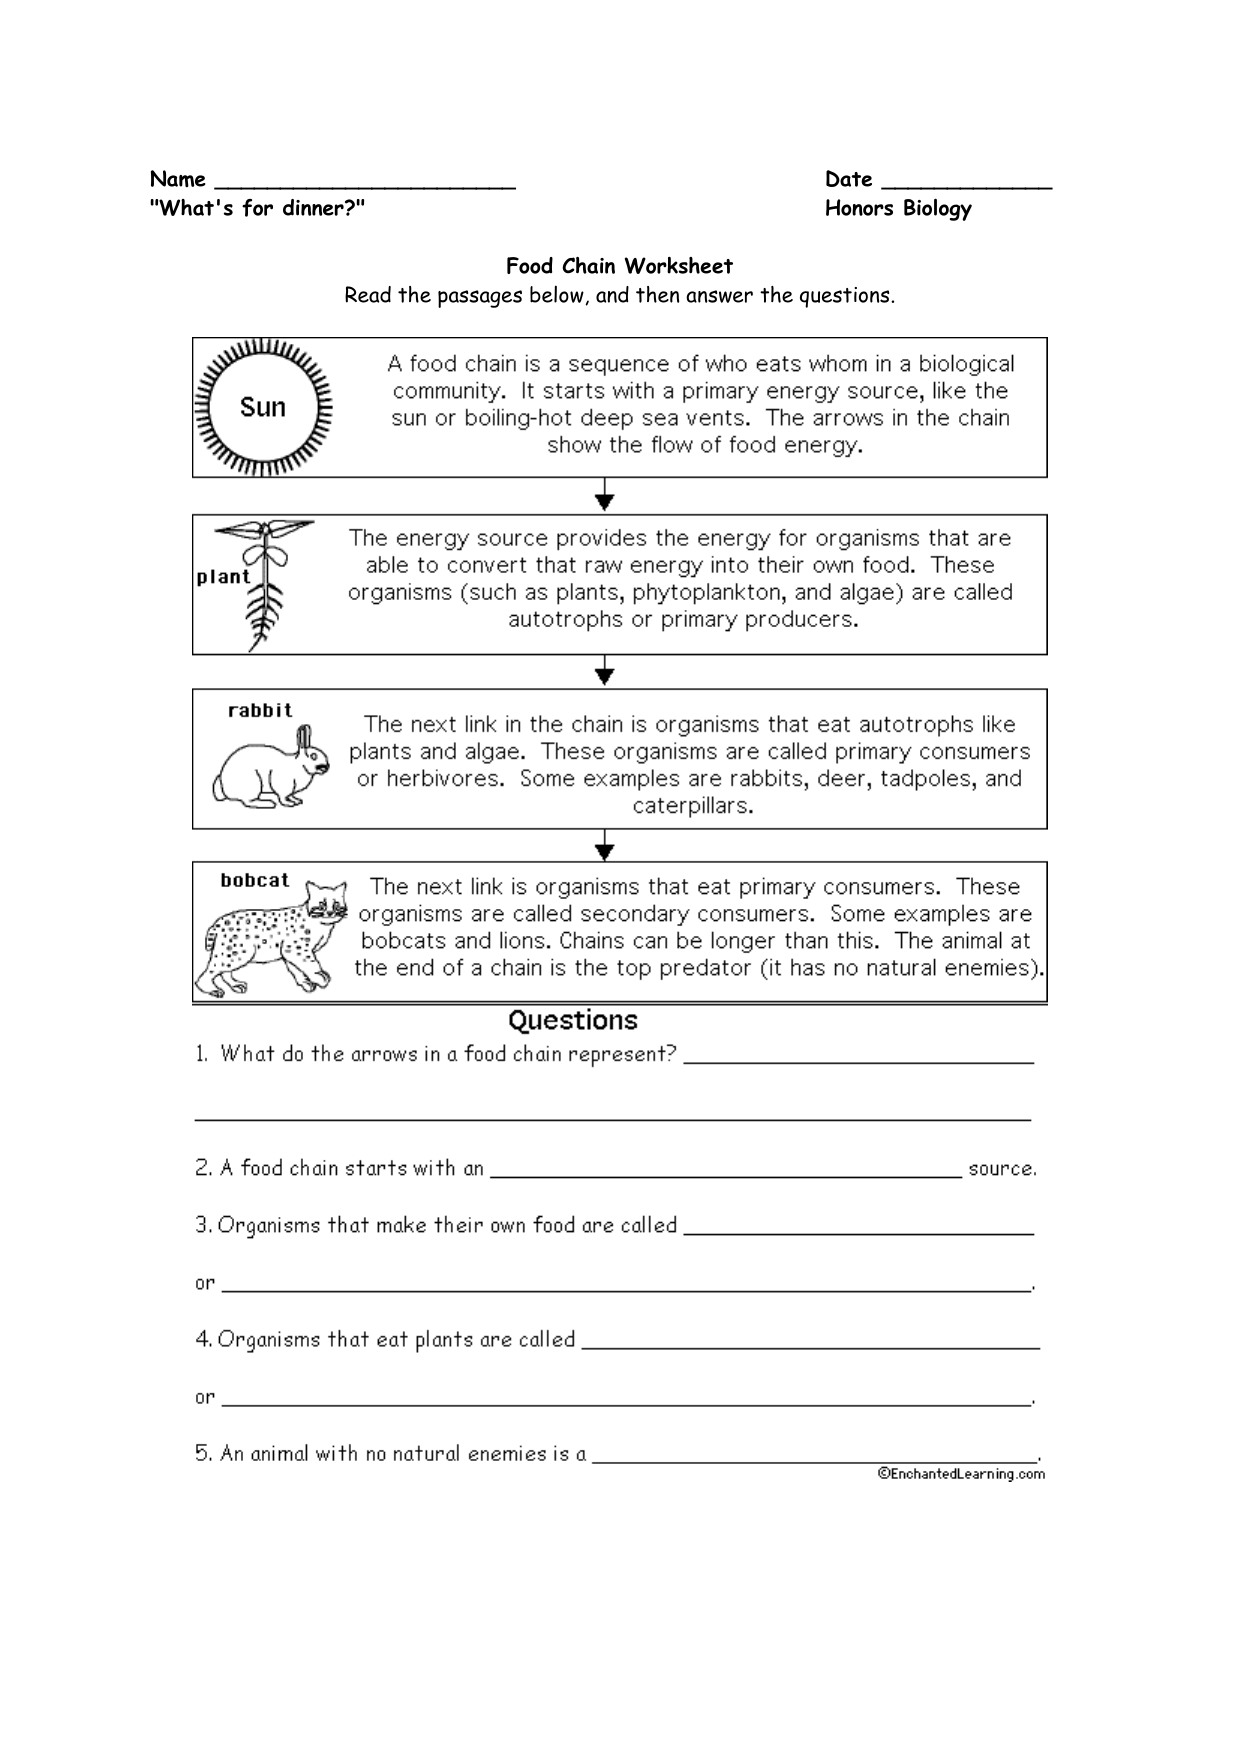 Food Chain and Food web Worksheets For Food Chain Worksheet Answers